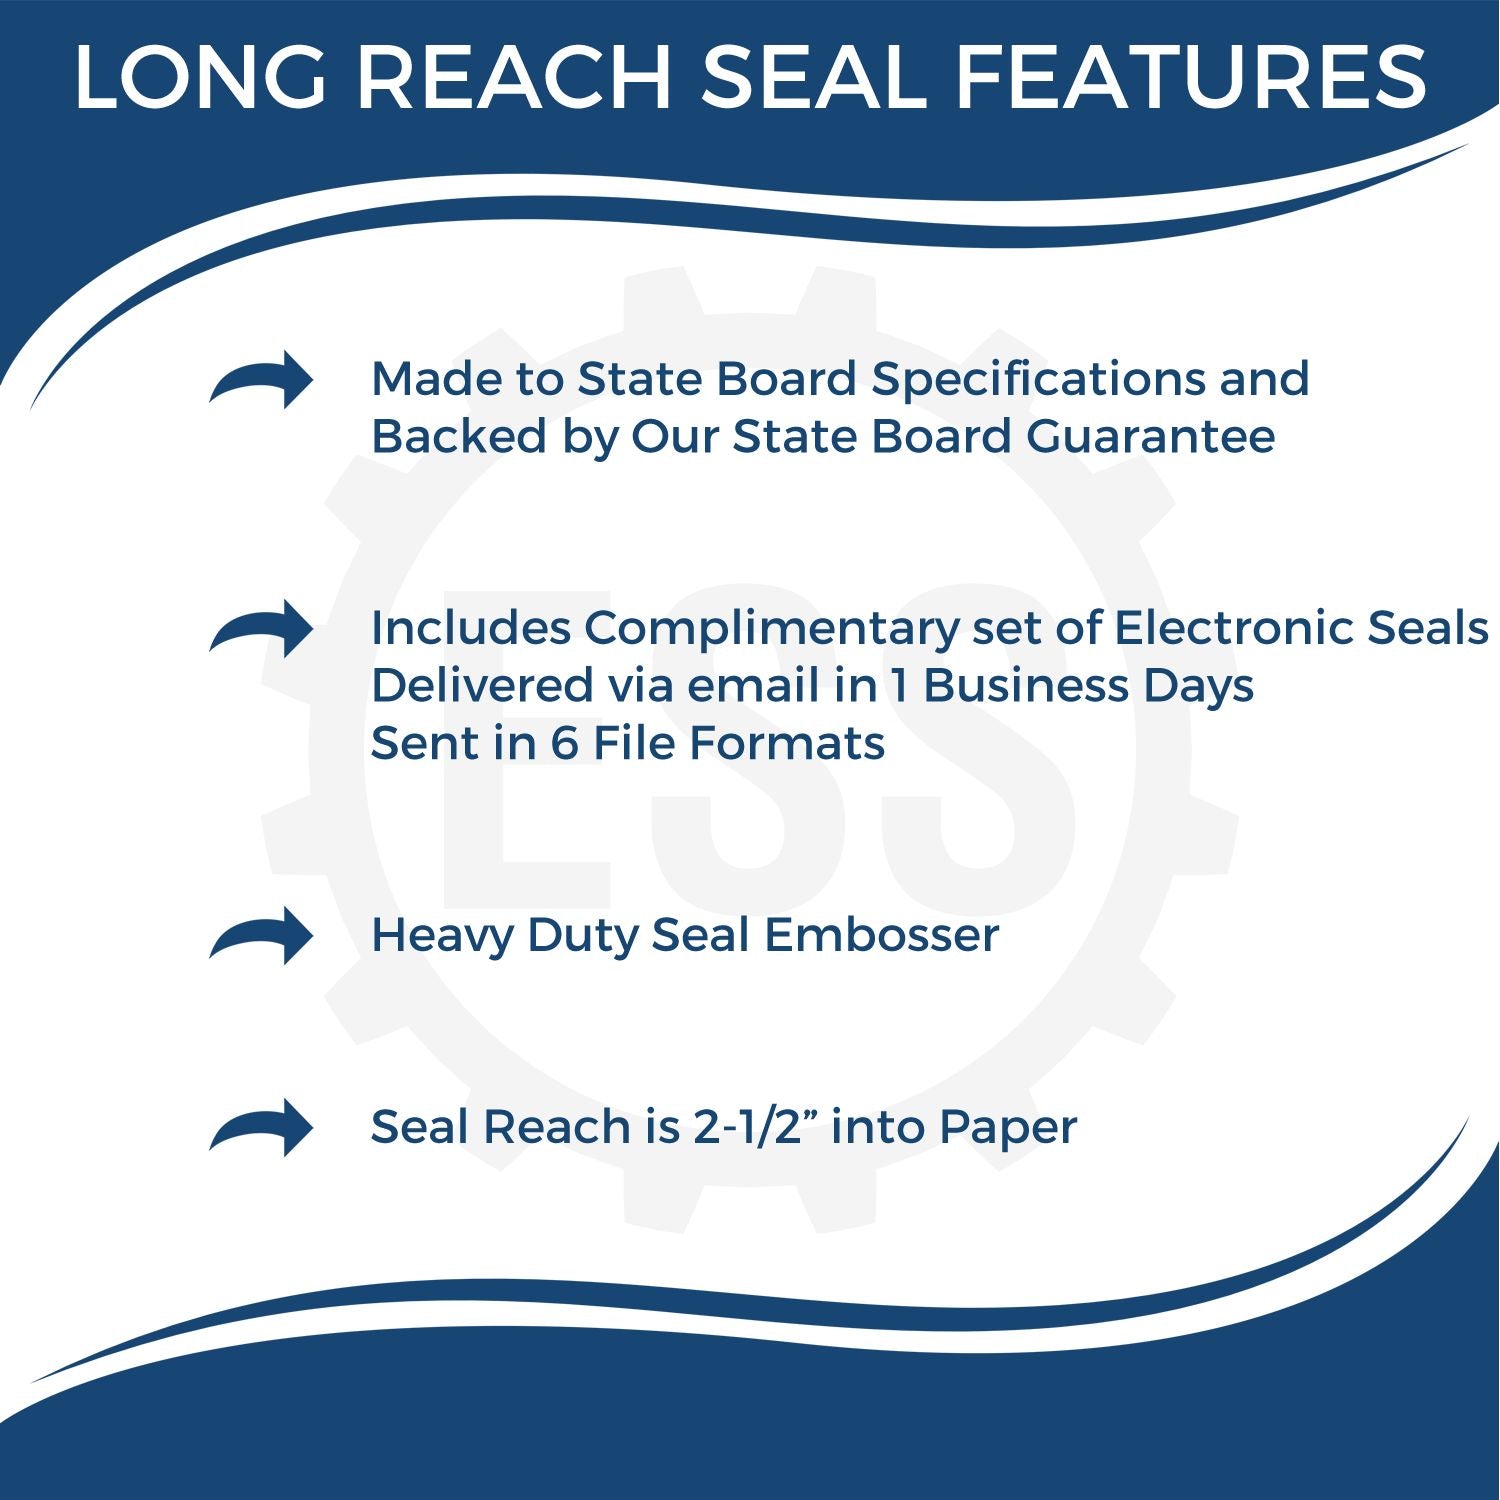 The main image for the Long Reach Vermont PE Seal depicting a sample of the imprint and electronic files